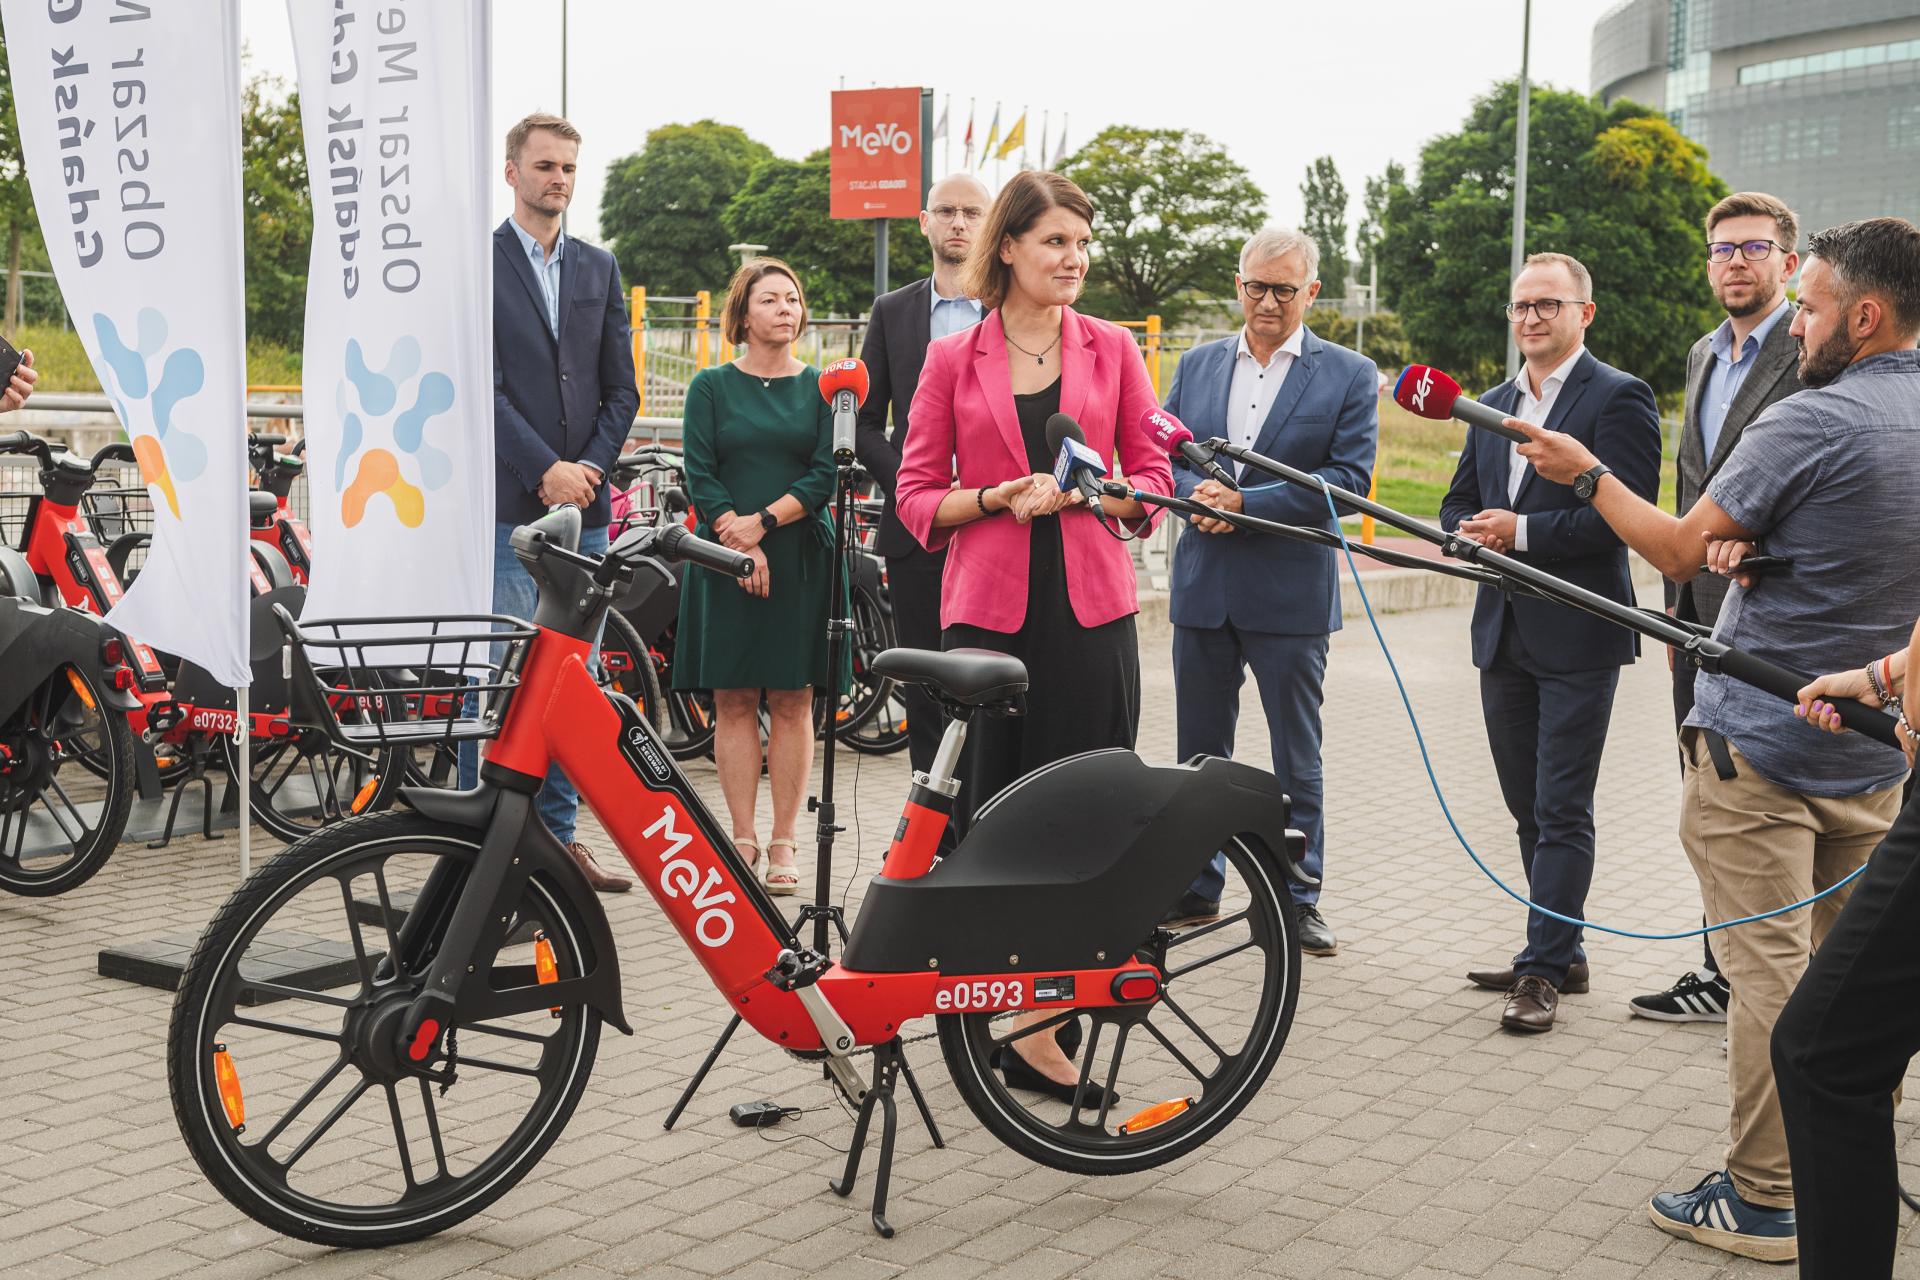 Bikeshare service twice the size of Singapore goes live